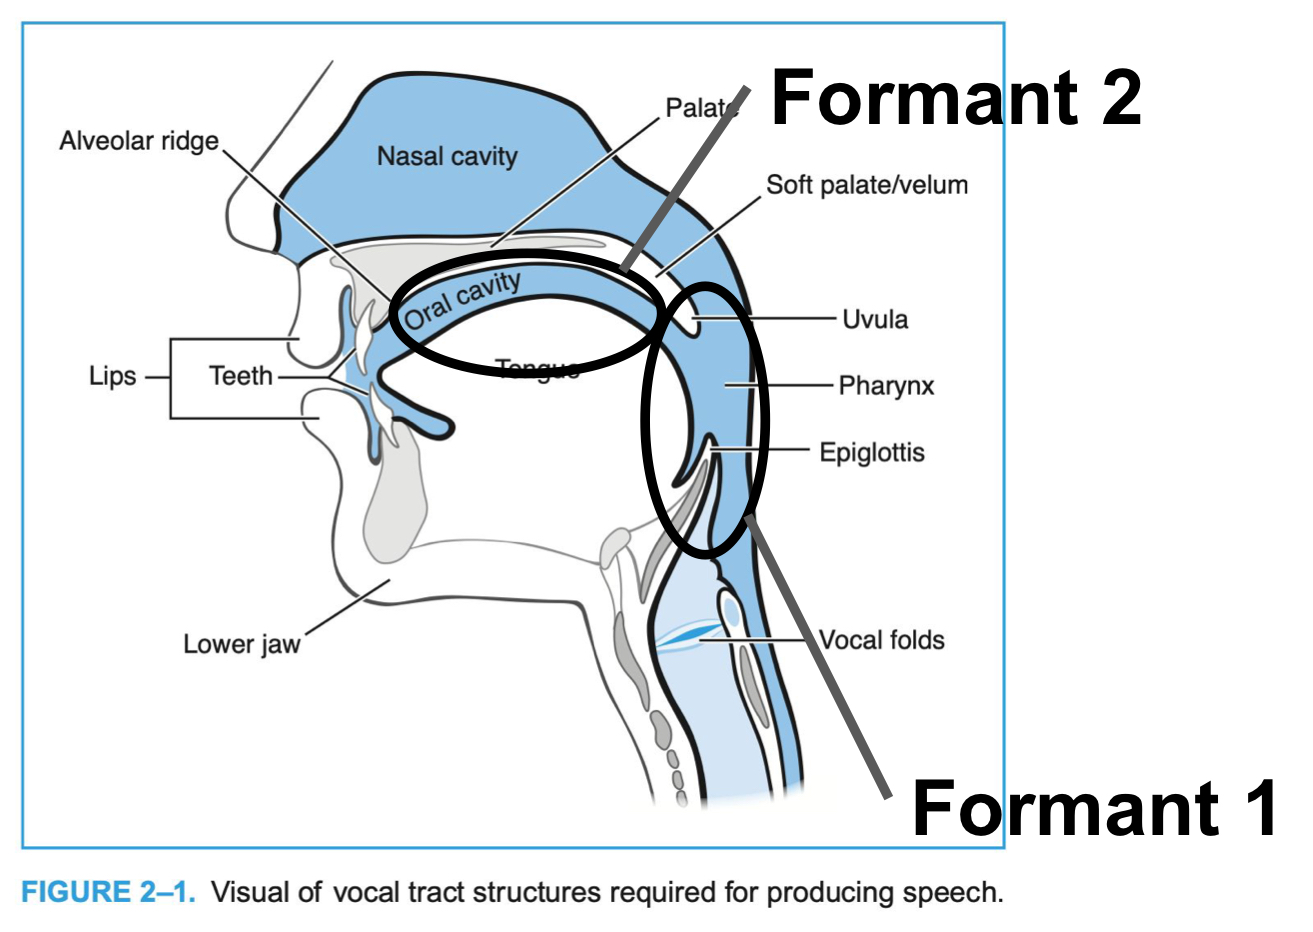 <p>F1 is determined by the tongue <strong>height</strong> (the higher the tongue is, the lower the frequency); F2 is determined by the <strong>back-ness/forwardness </strong>(the further forward the tongue, the higher the frequency) </p>